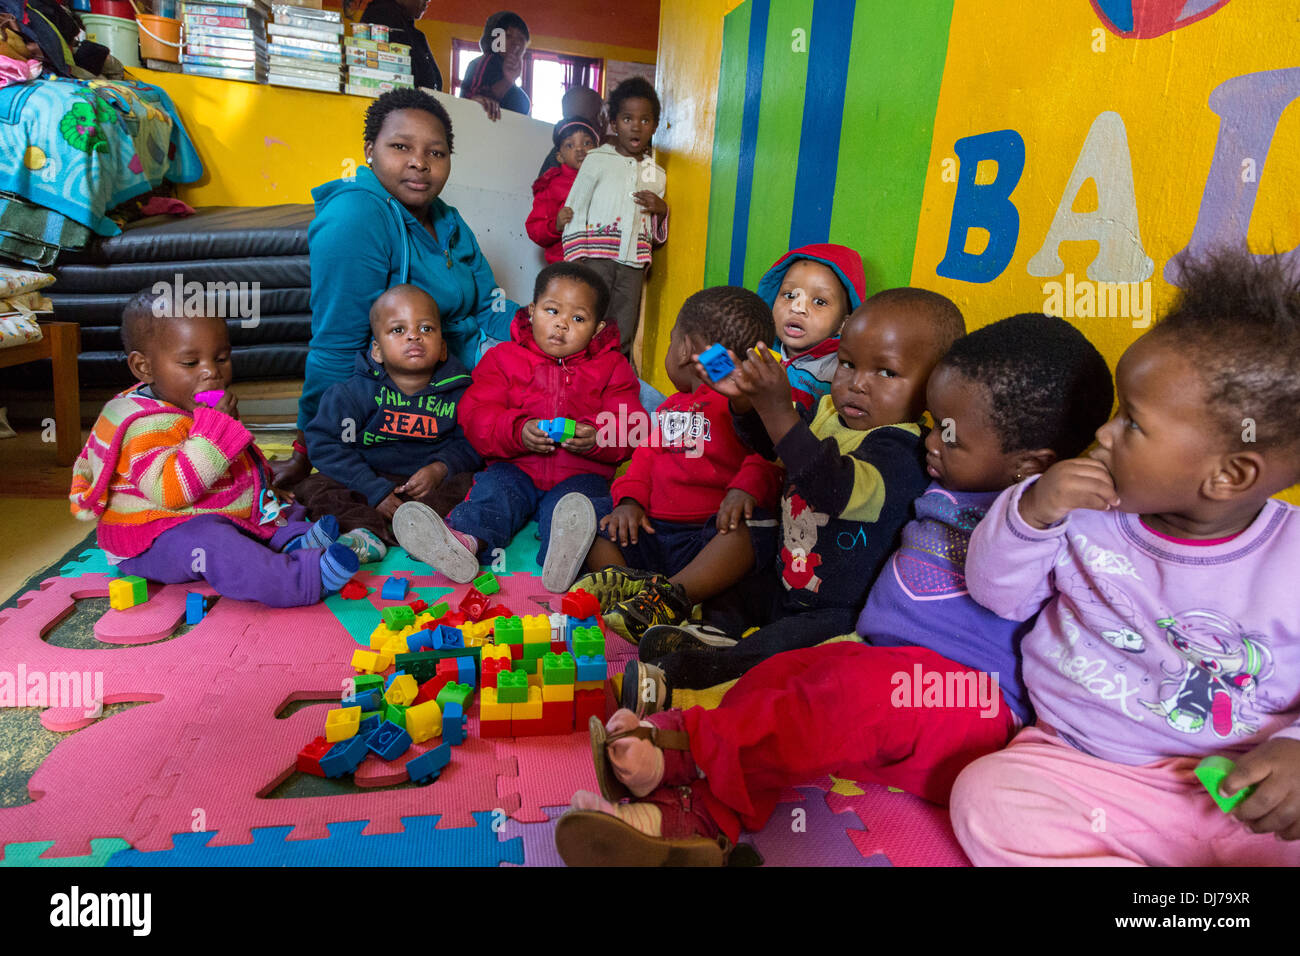 South Africa, Cape Town. Young Children Playing with Plastic Construction Pieces in a Day-care Facility for Young Children. Stock Photo